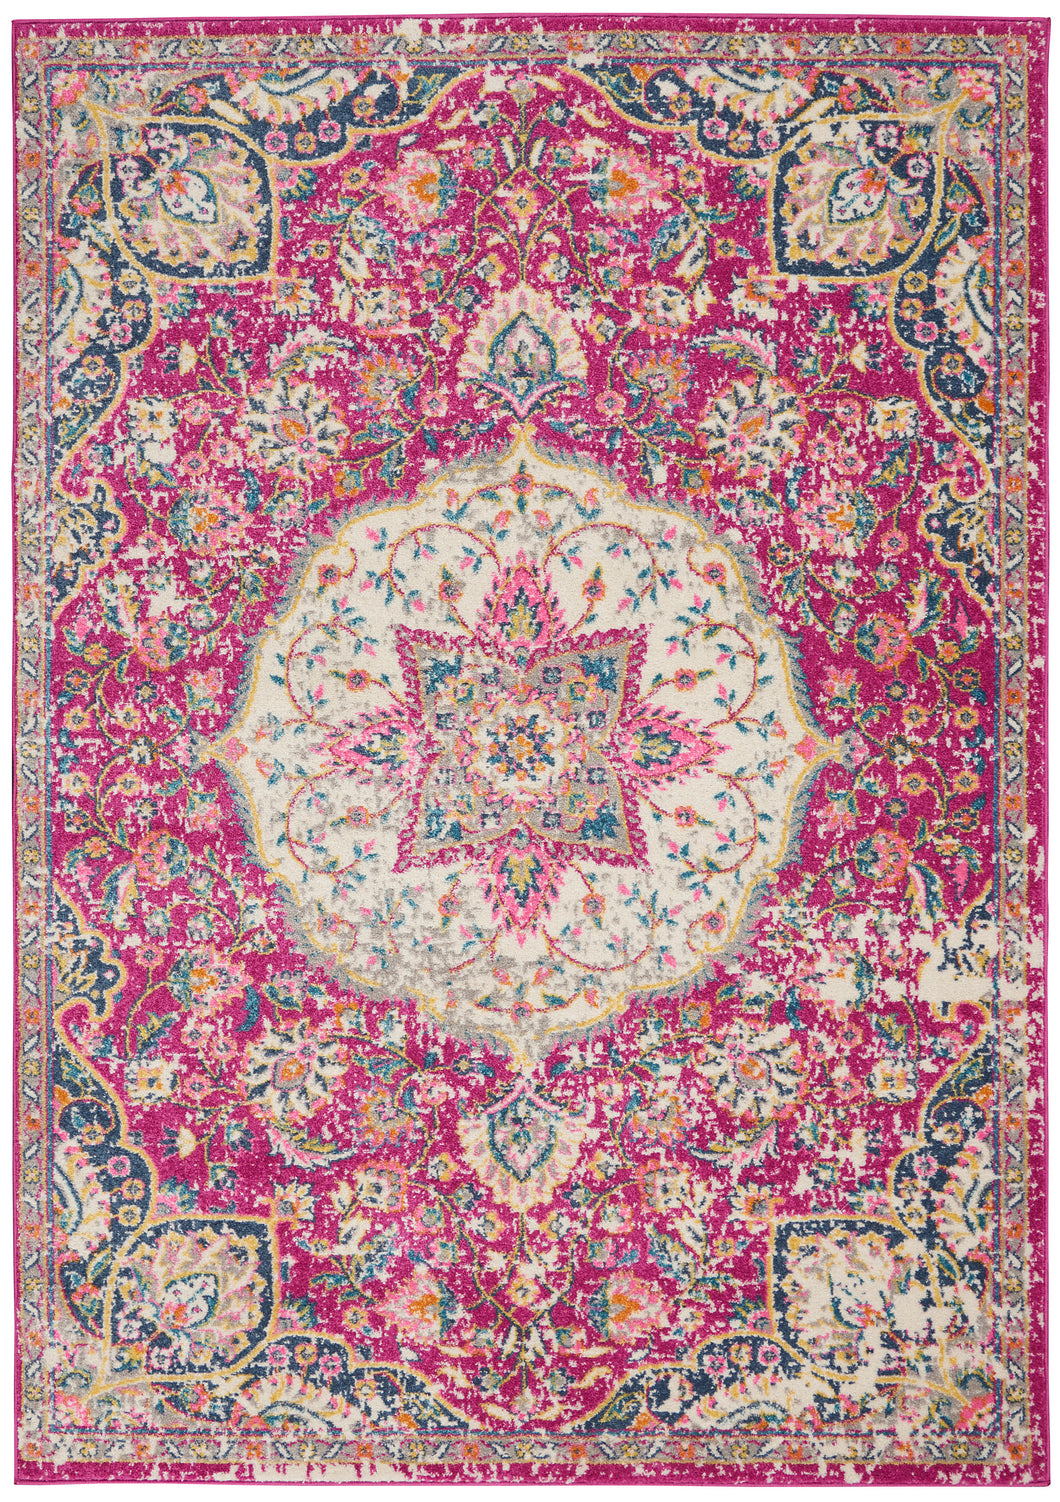 Nourison Passion Bohemian Pink Colored 4'x6' Area Rug PSN22 Pink